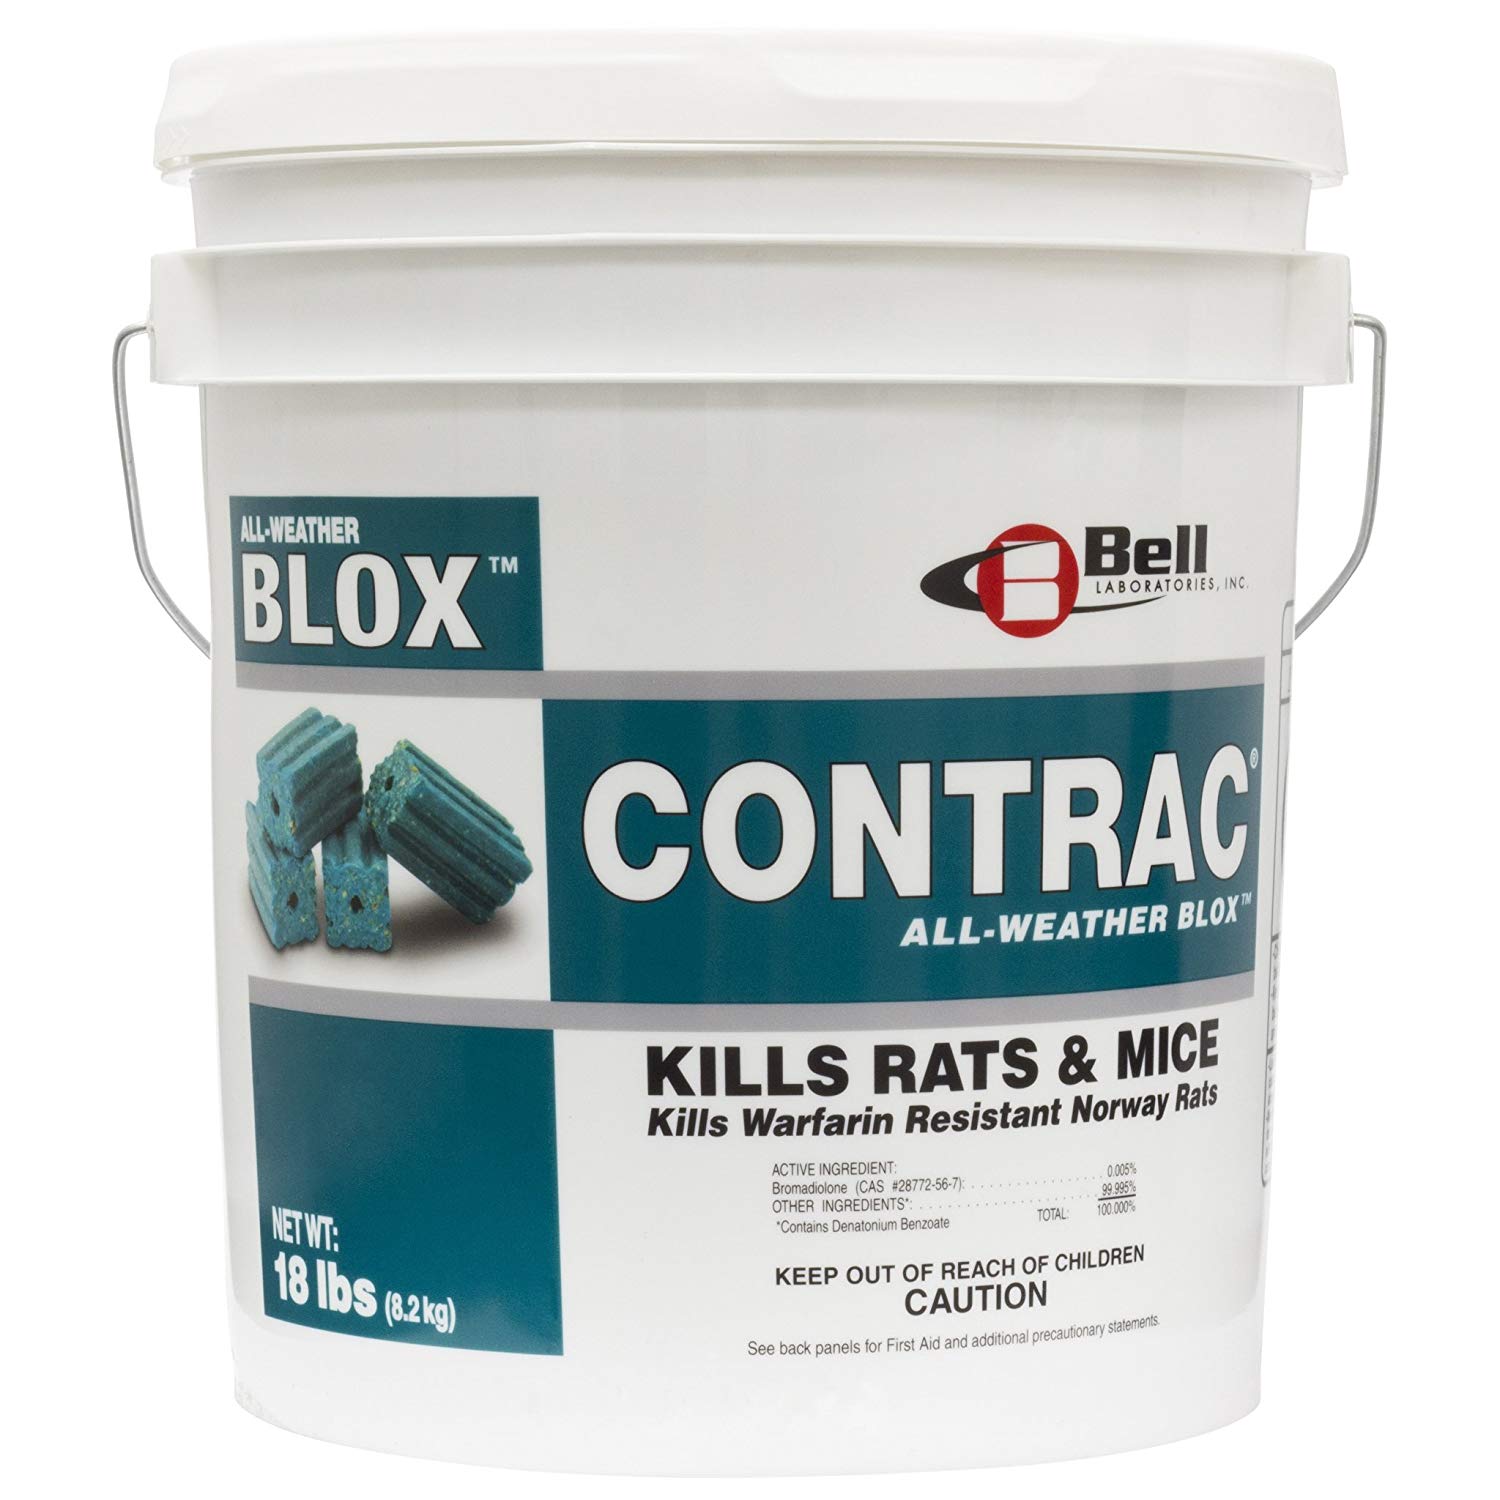 Contrac All Weather Blox 18Lb Pail